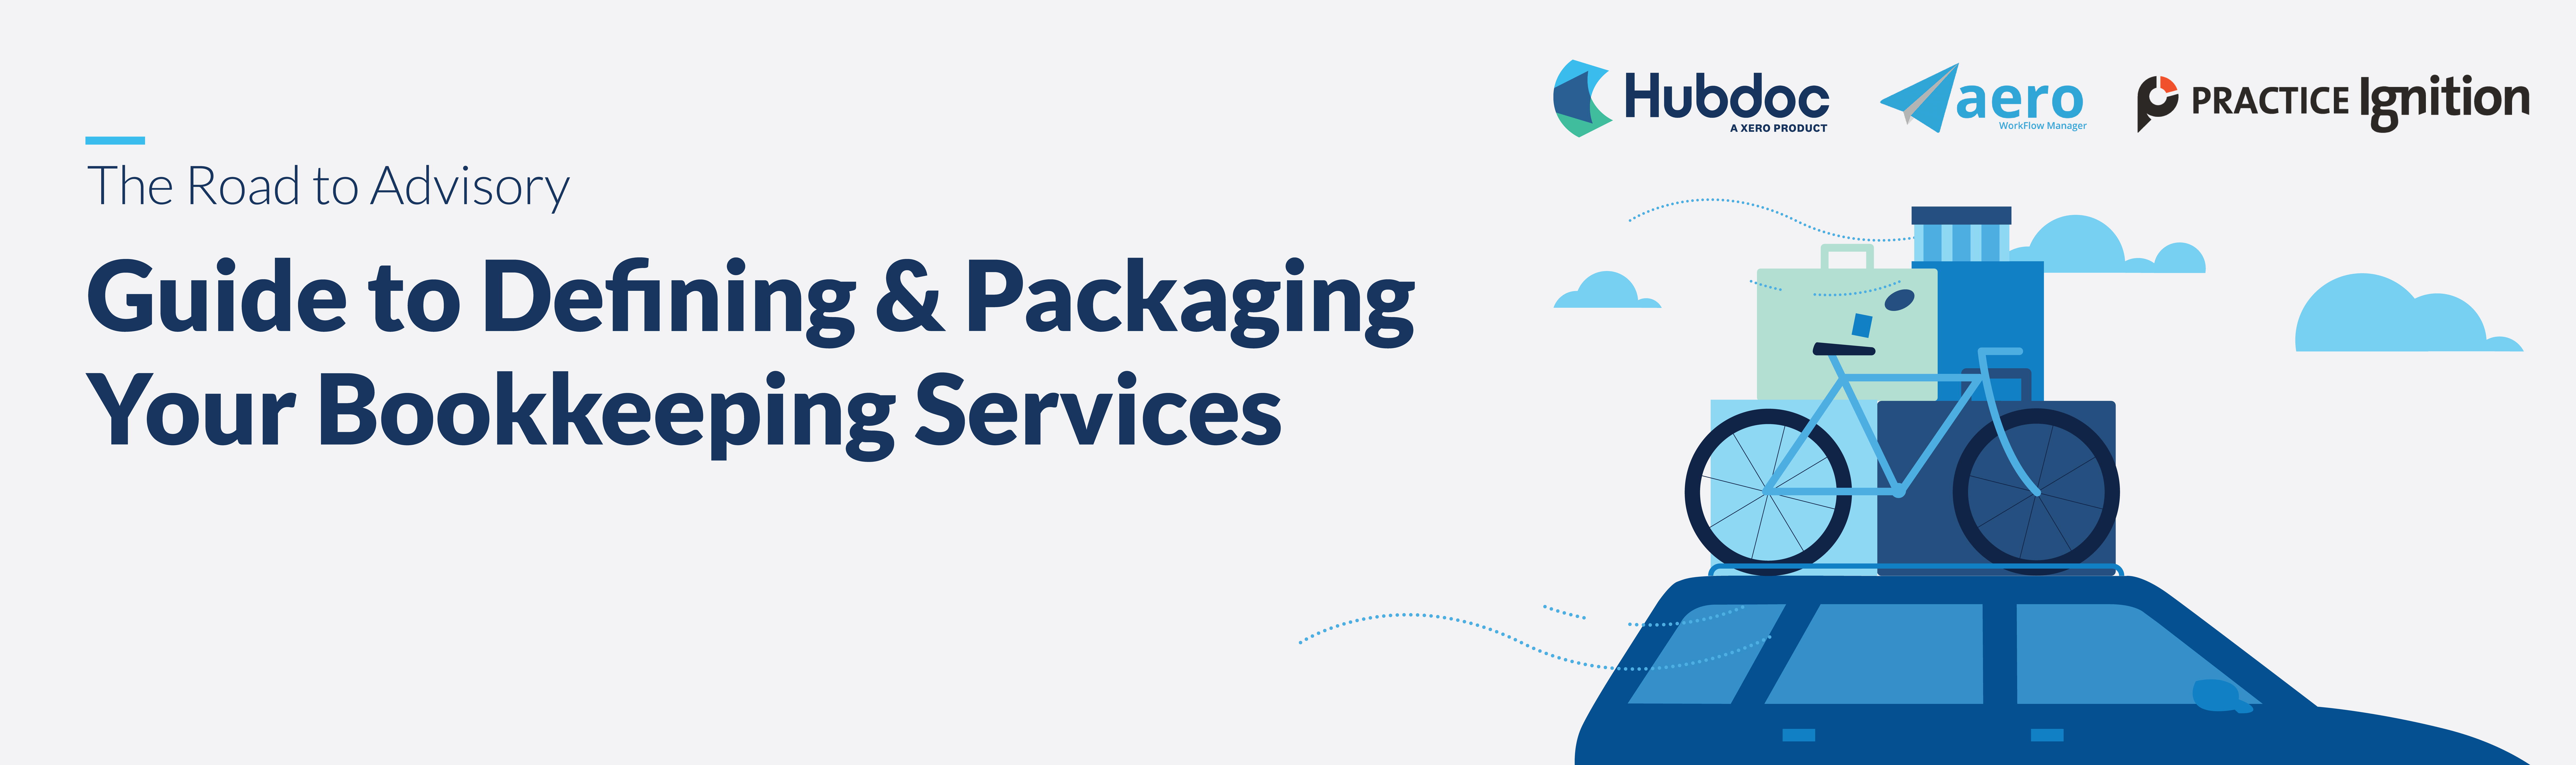 Defining & Packaging Your Bookkeeping Services